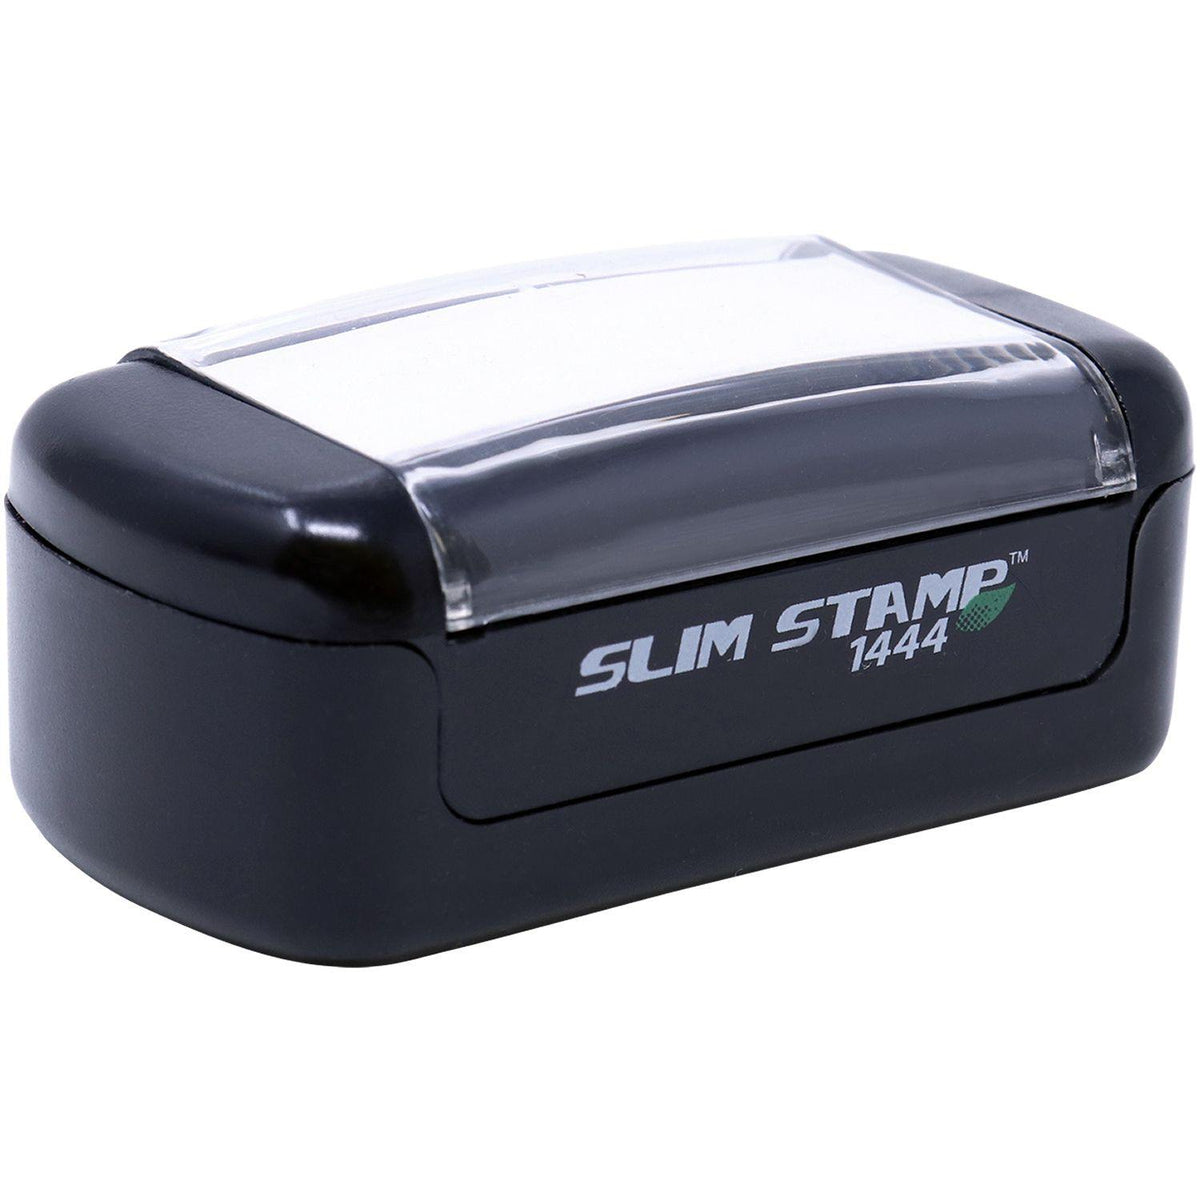 Alt View of Slim Pre Inked Deposition Exhibit Stamp Mount Angle